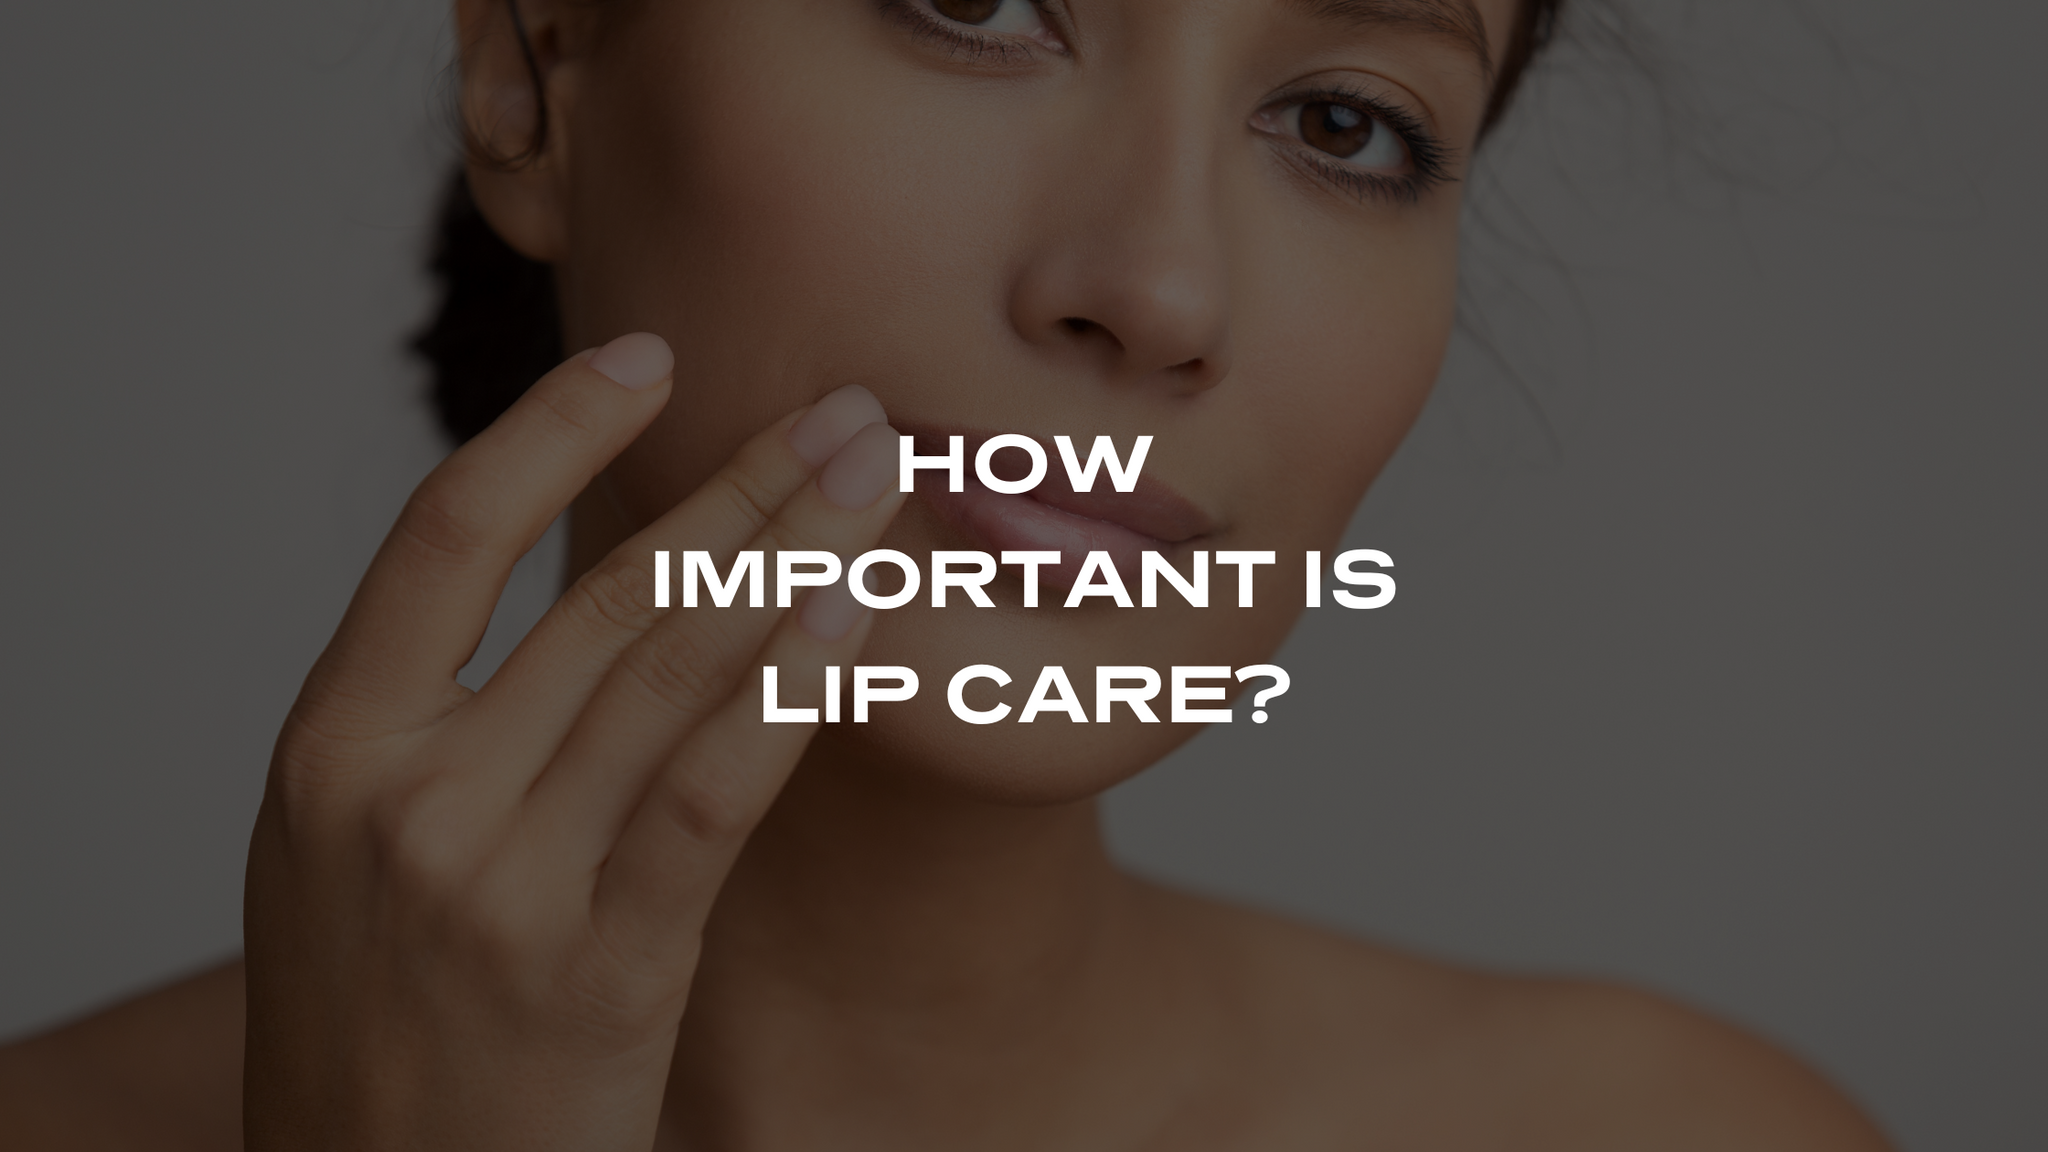 THE IMPORTANCE OF LIP CARE IN YOUR SKINCARE ROUTINE